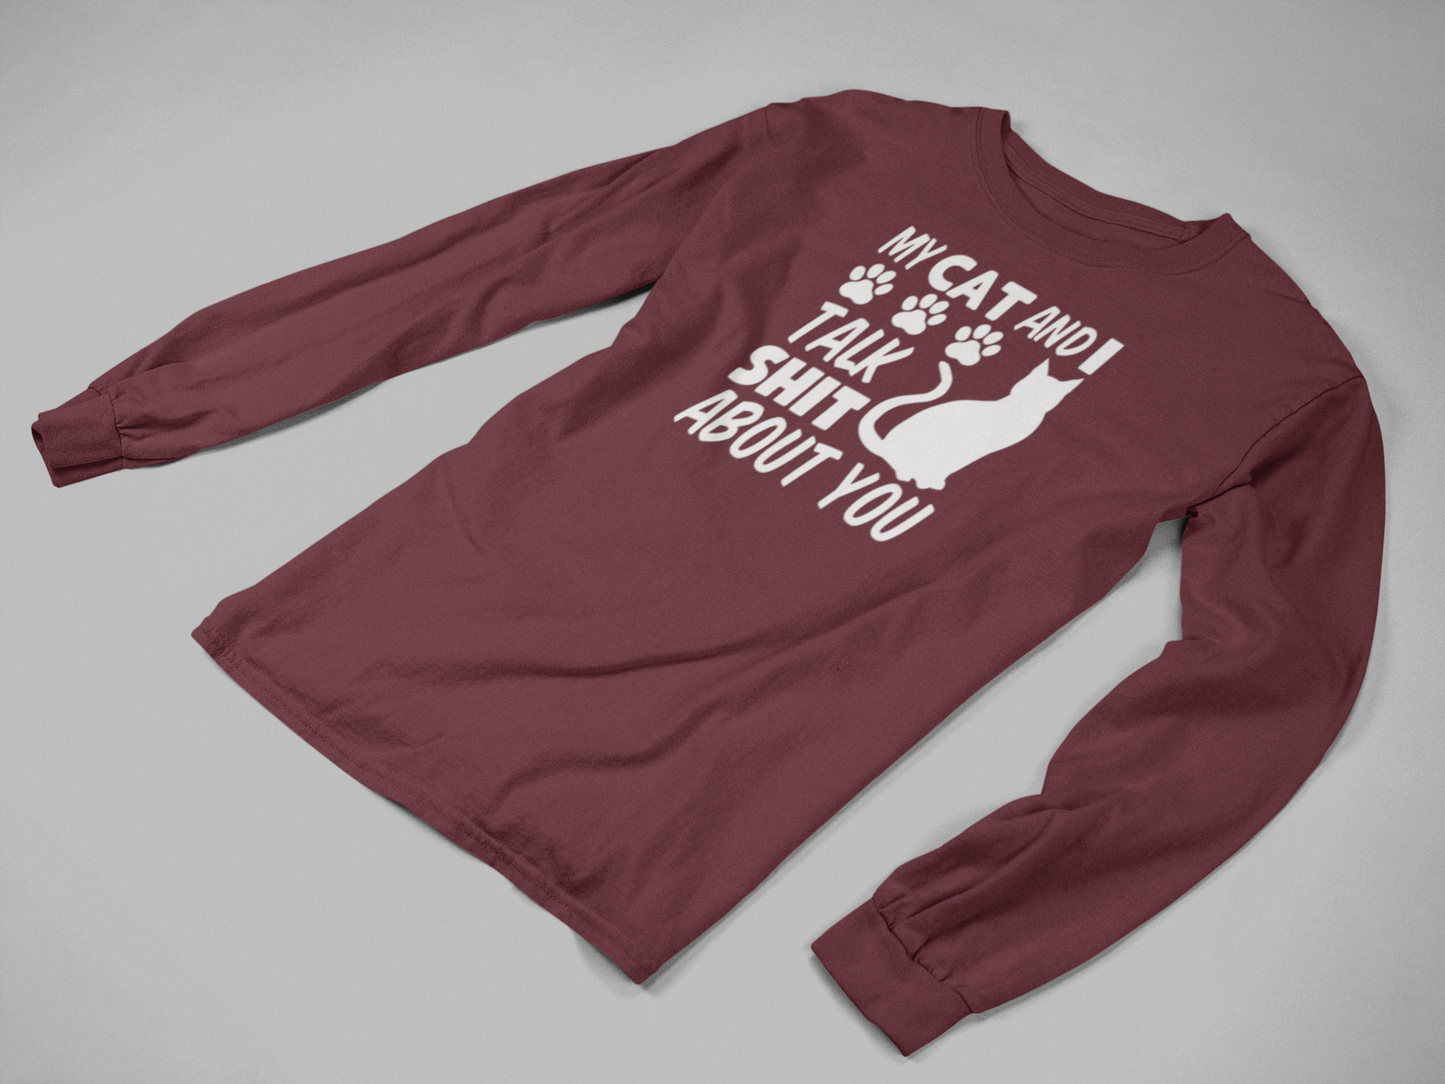 My Cat and I Talk Sh*t About You long sleeve